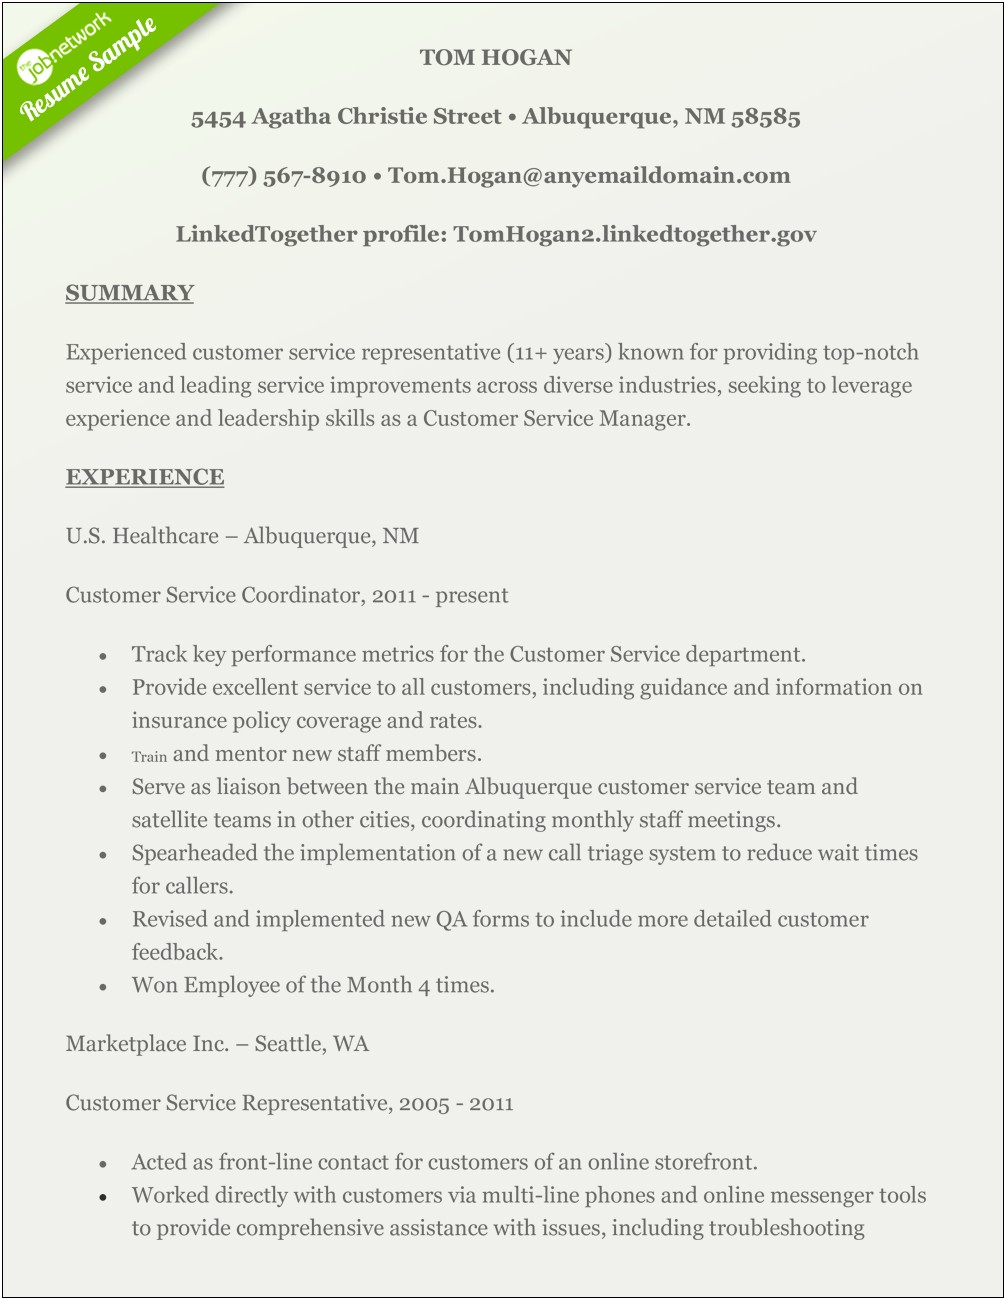 Resume Objective For Guest Service Representative